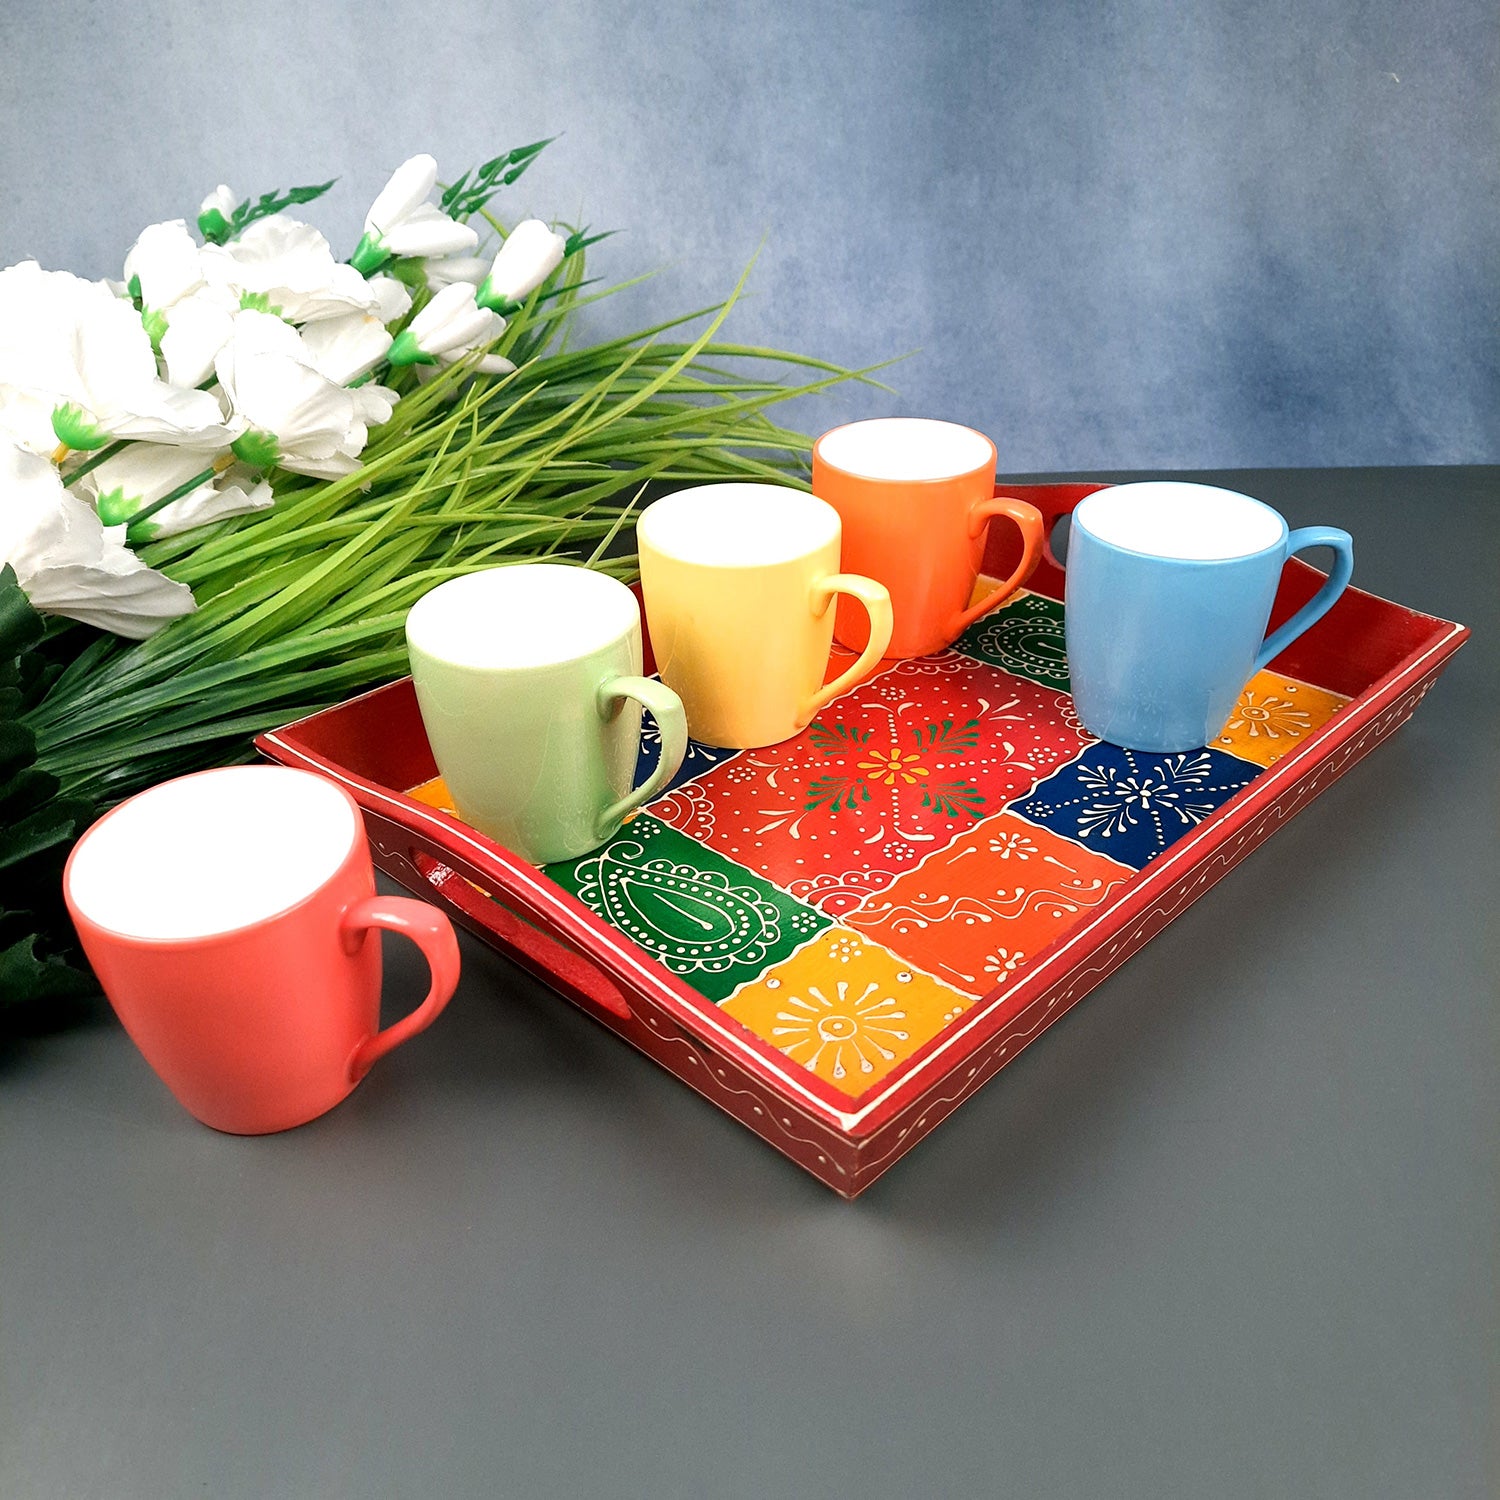 Decorative Tray | Tray for Serving and Home Decor - 13 Inch- Apkamart